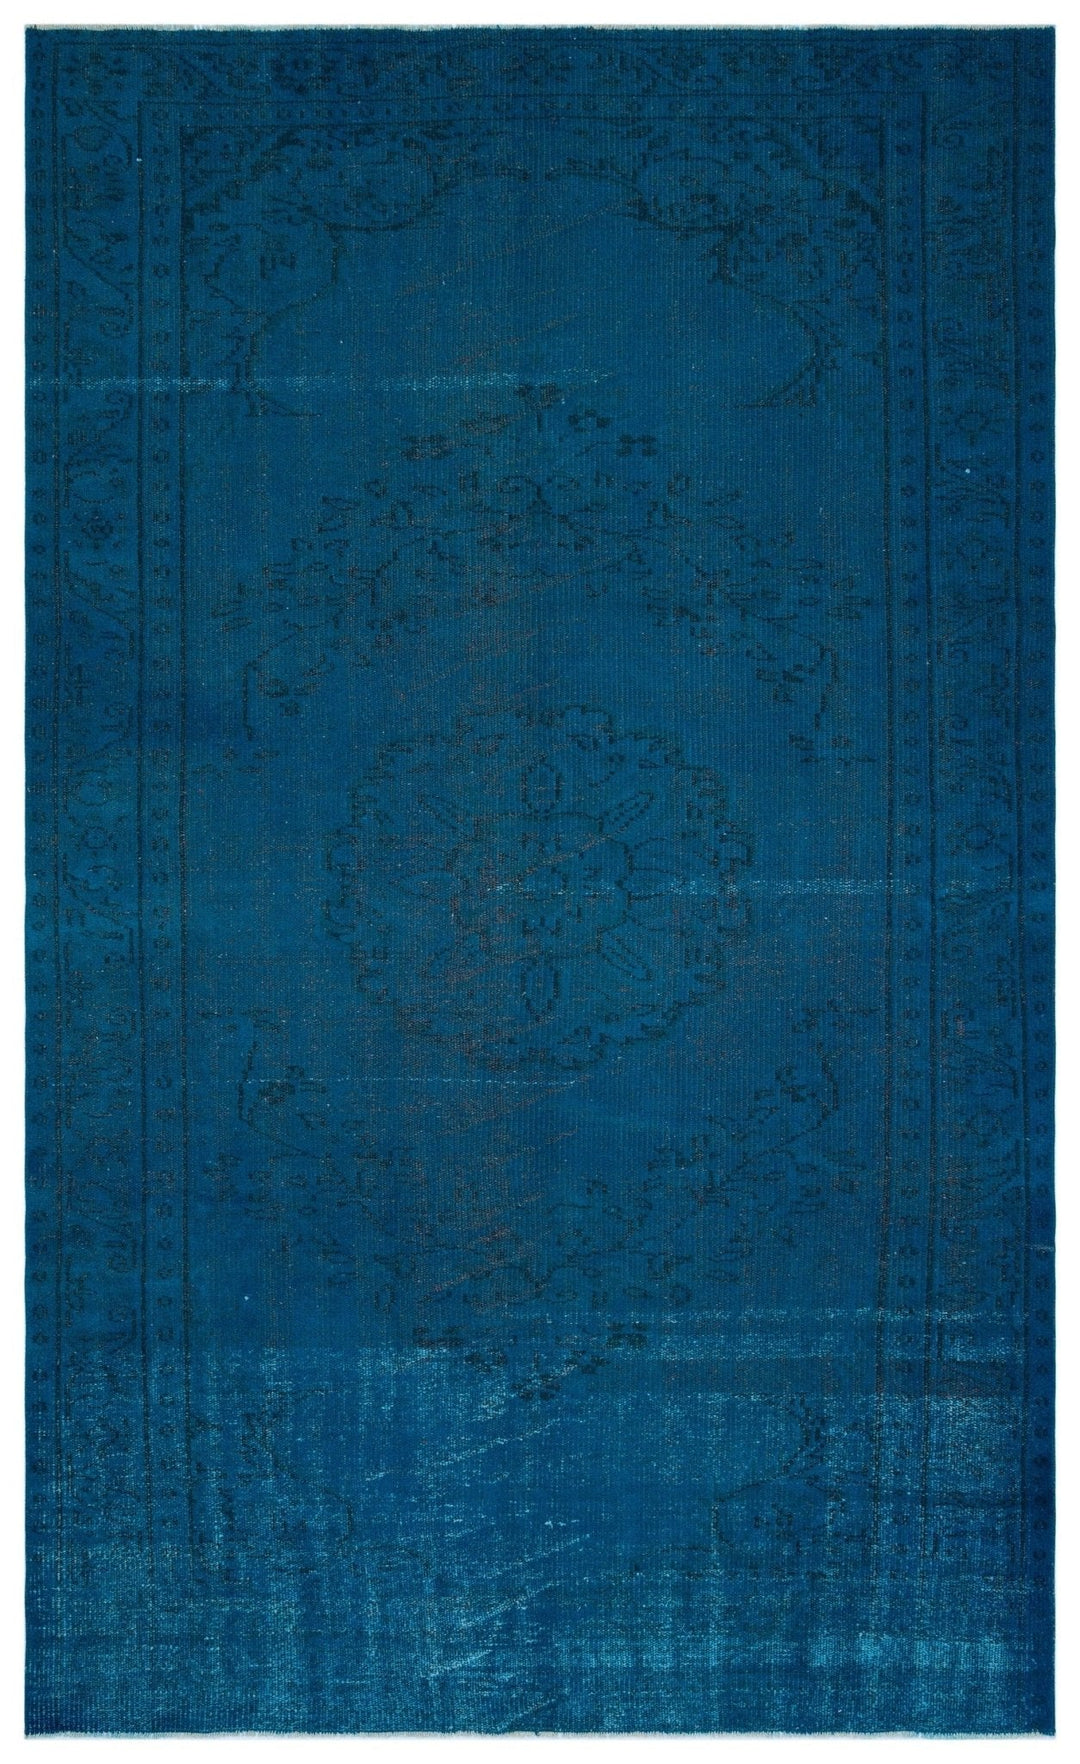 Athens 28014 Blue Tumbled Wool Hand Tufted Carpet 171 x 278